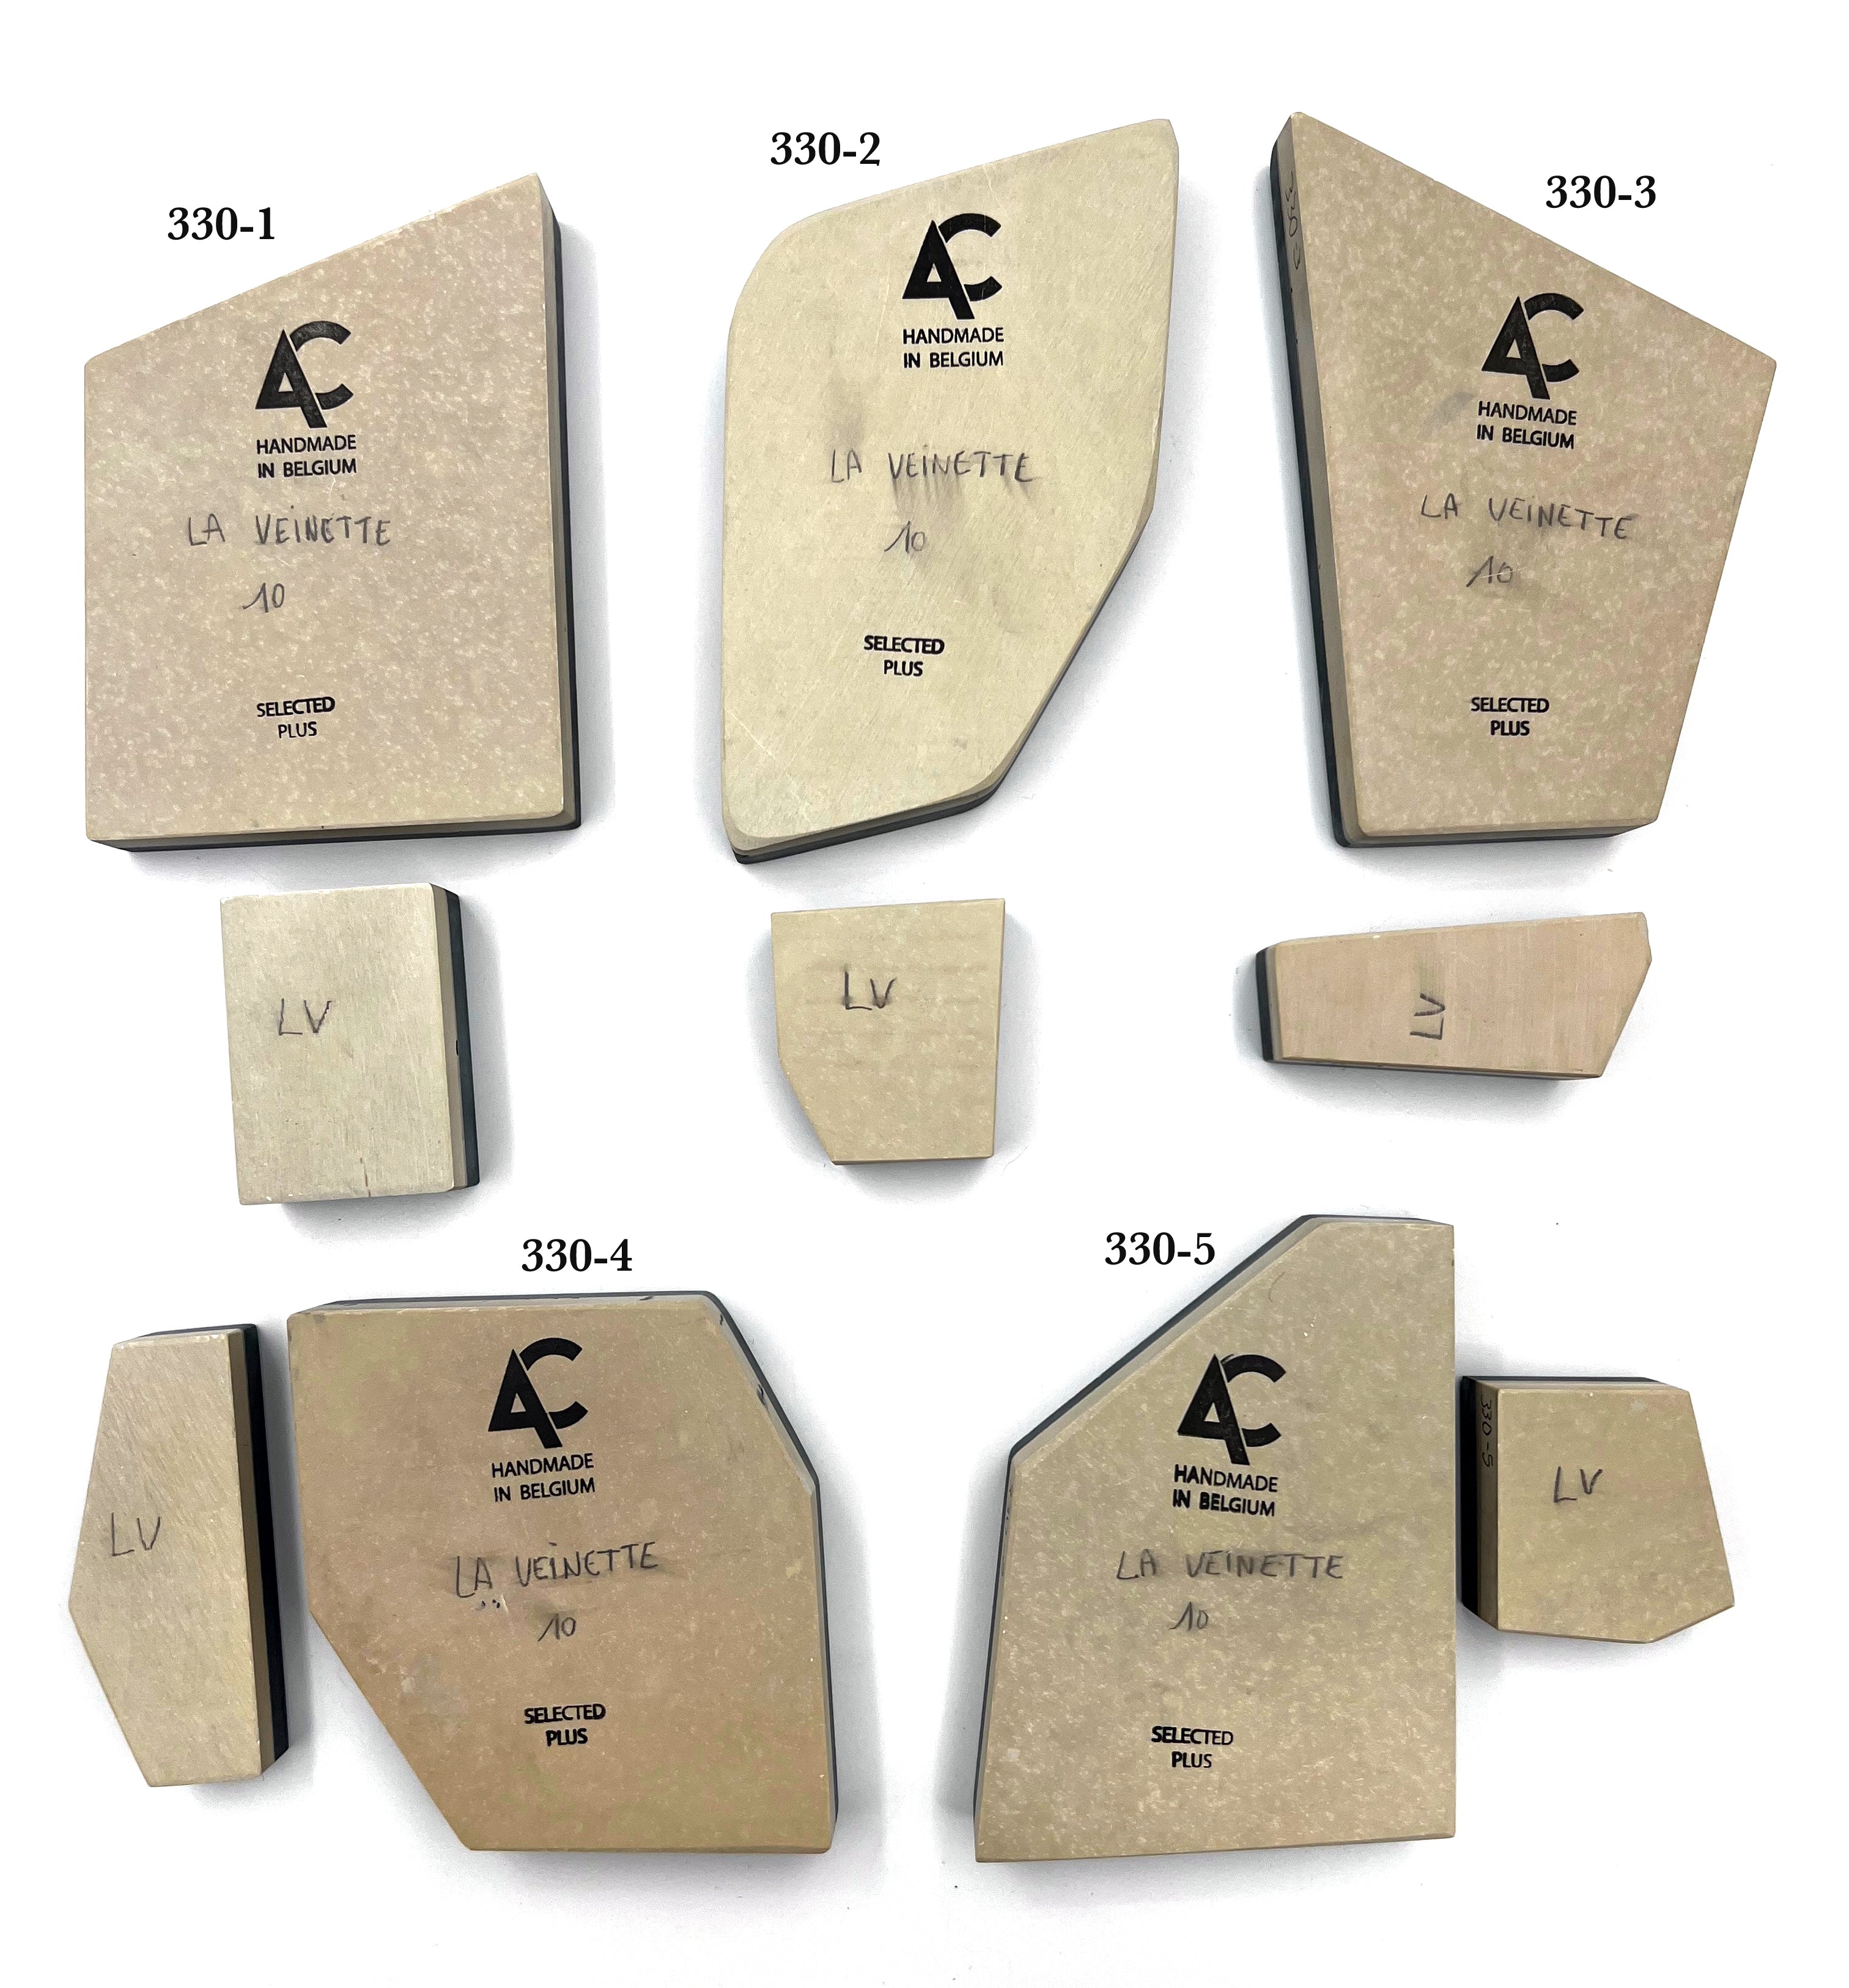 Belgian Coticule La Veinette - Bout 10 Select Plus Sharpening Stone with Slurry Stone - CHOOSE YOUR STONE